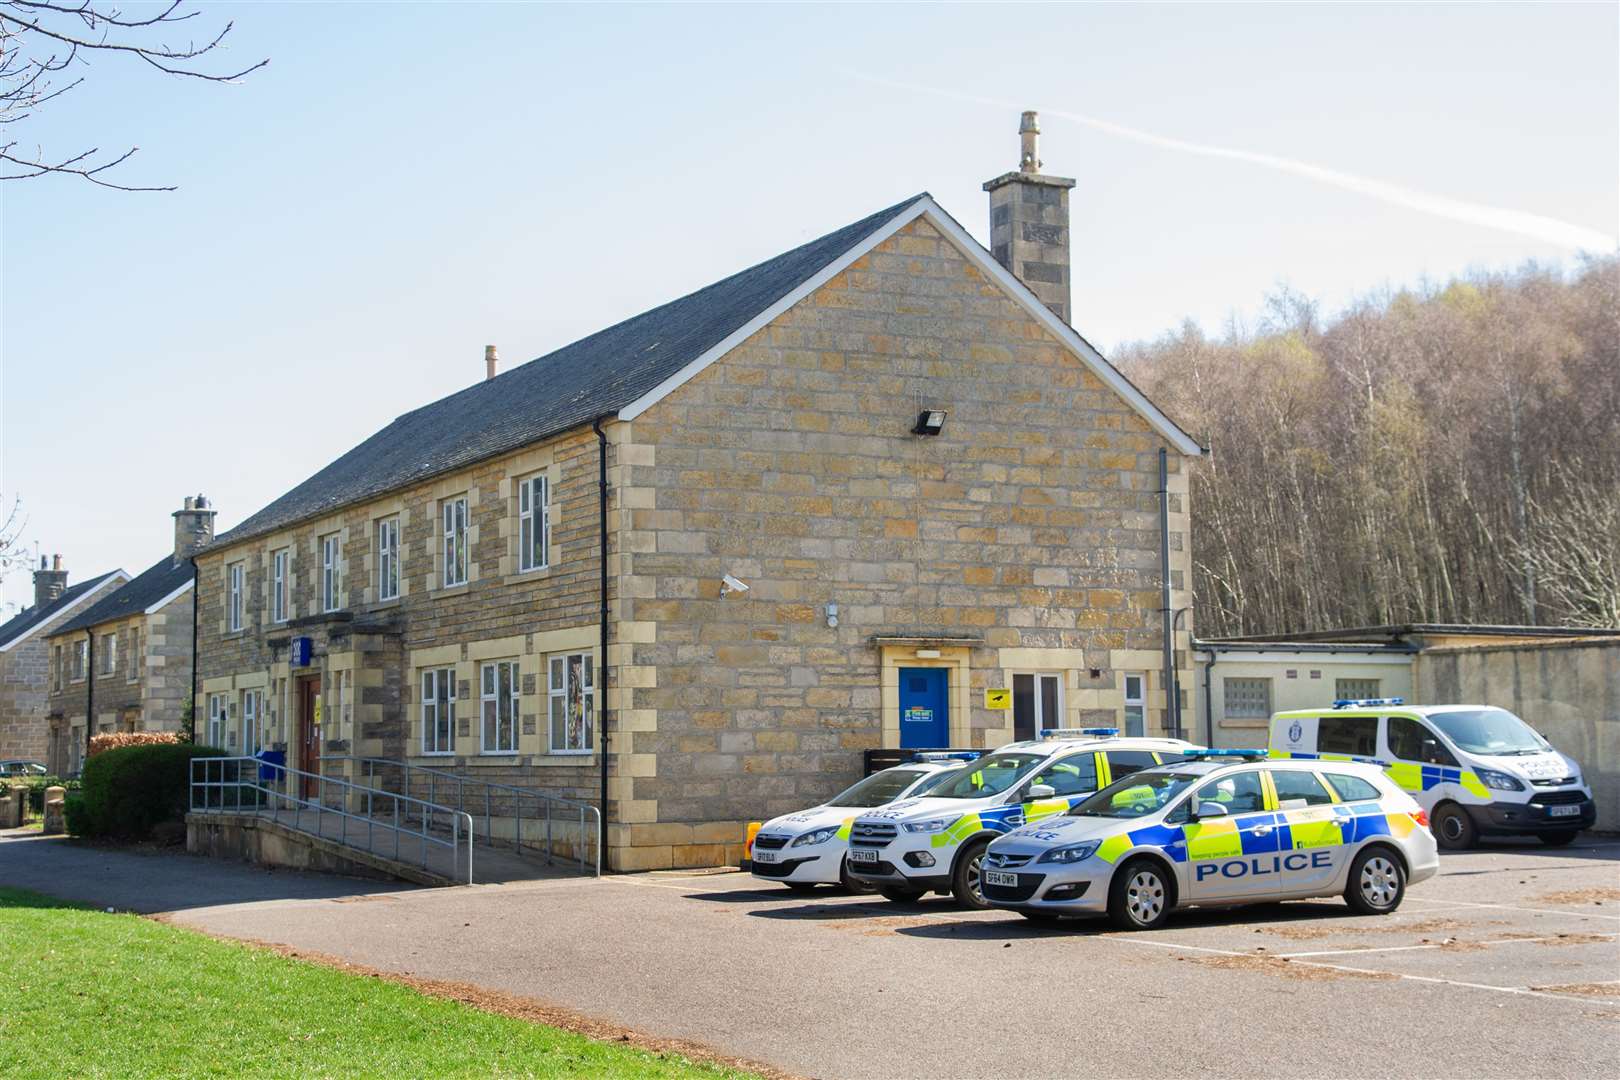 Forres Police Station counter is open from 8.15am-4pm Monday-Thursday and 8.15am- 2.45pm on Fridays.